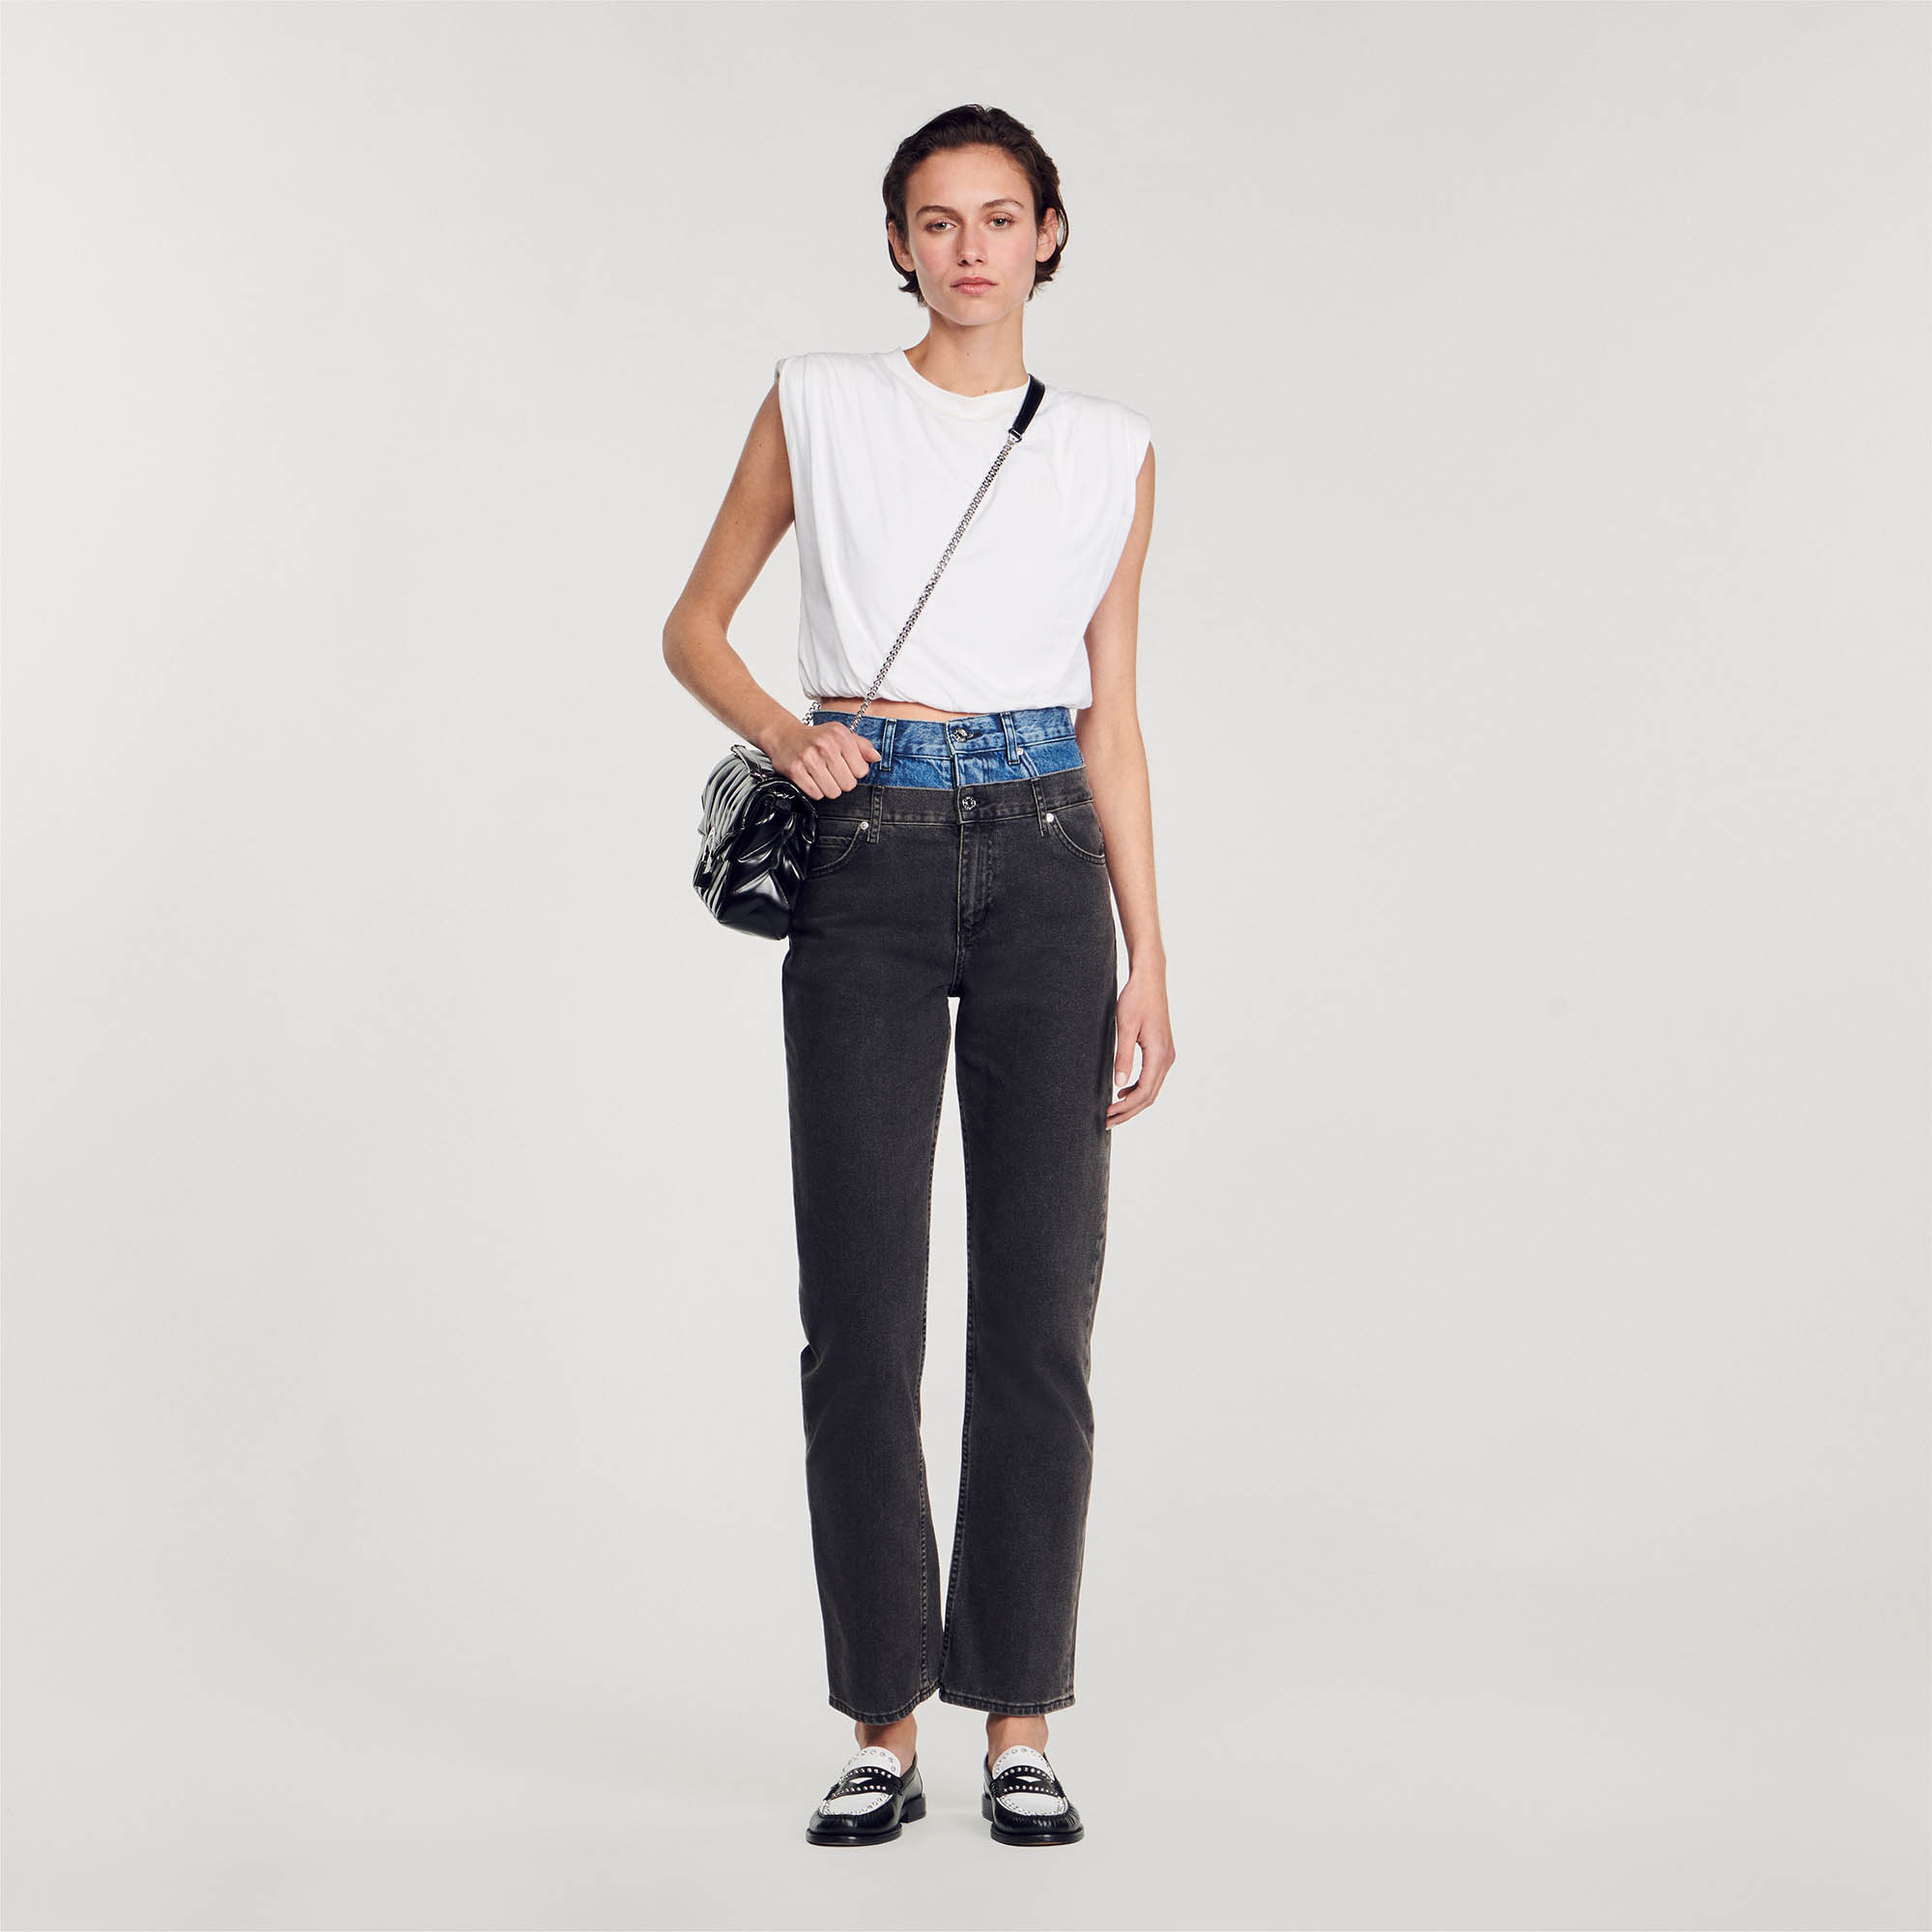 Sandro cotton Yoke: Denim mom jeans featuring a two-tone double waist with a trompe-l'ail effect